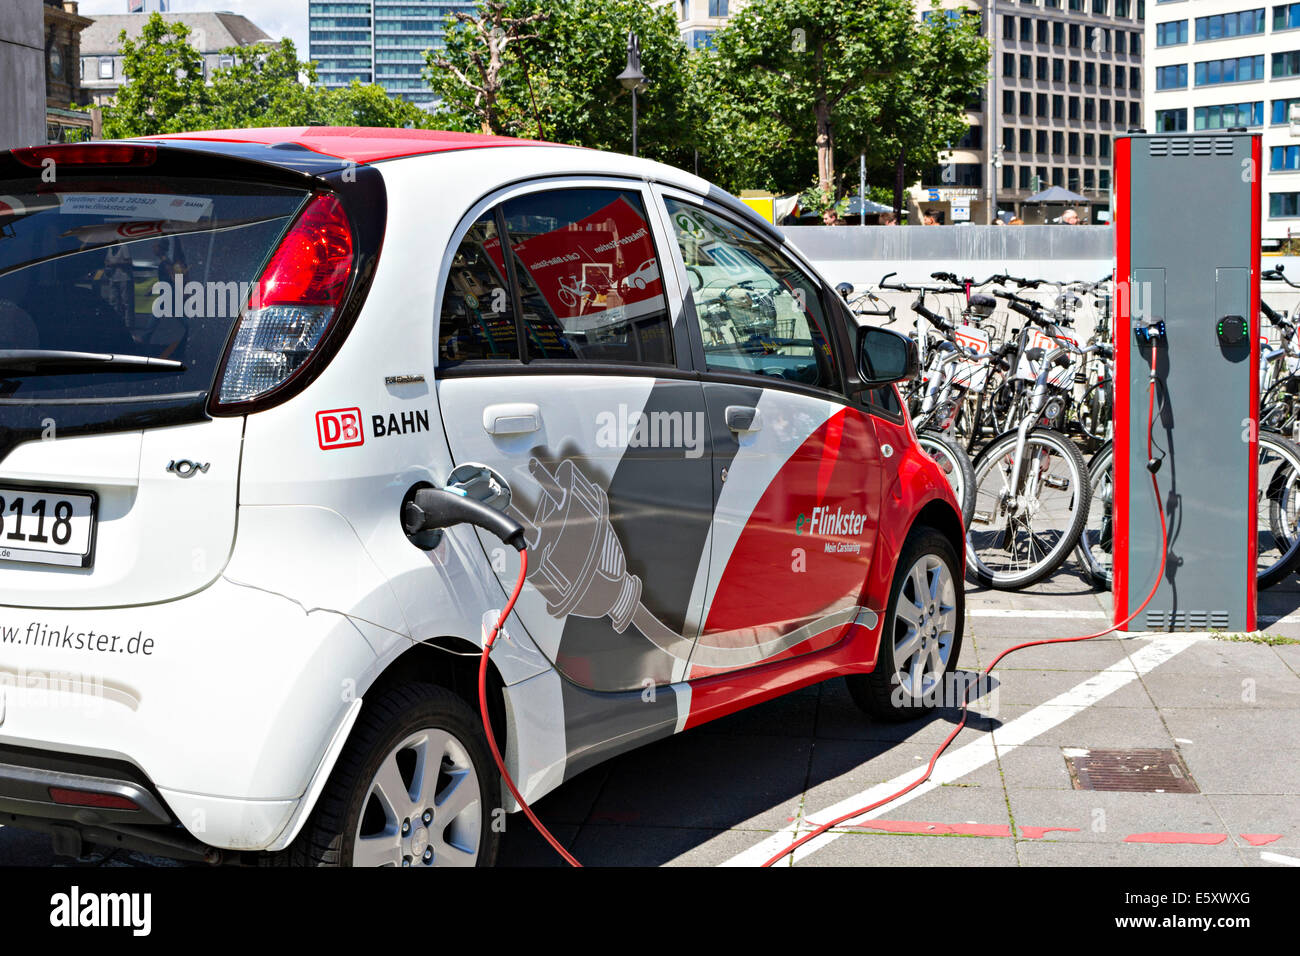 Flinkster DB car sharing electric vehicle being charged, Frankfurt am Main, Hesse, Germany, Europe. July 2014 Stock Photo